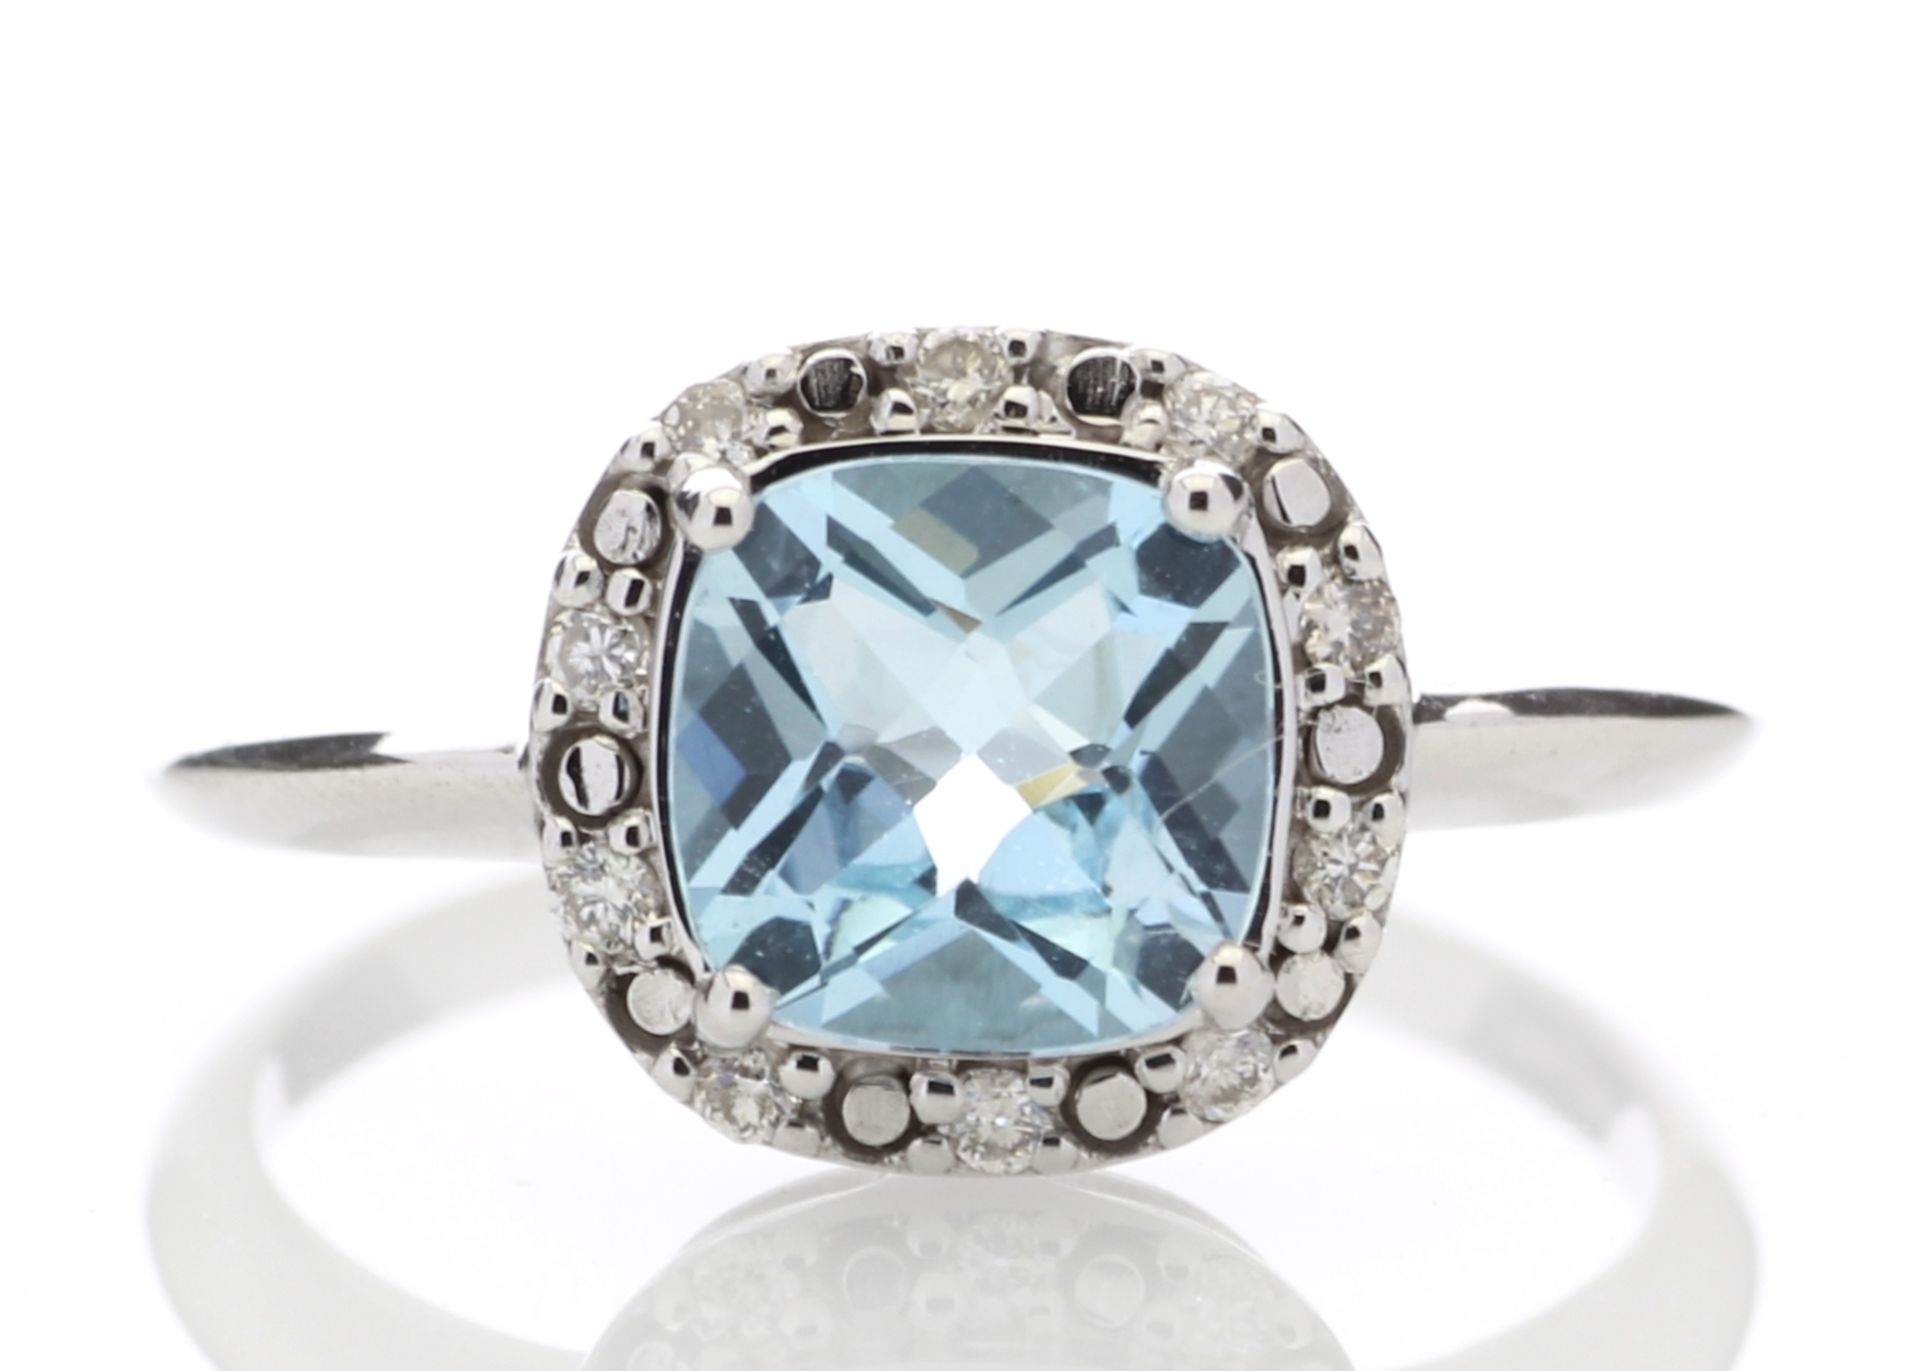 9ct White Gold Diamond And Blue Topaz Ring 0.10 Carats - Valued by GIE £1,920.00 - A stunning